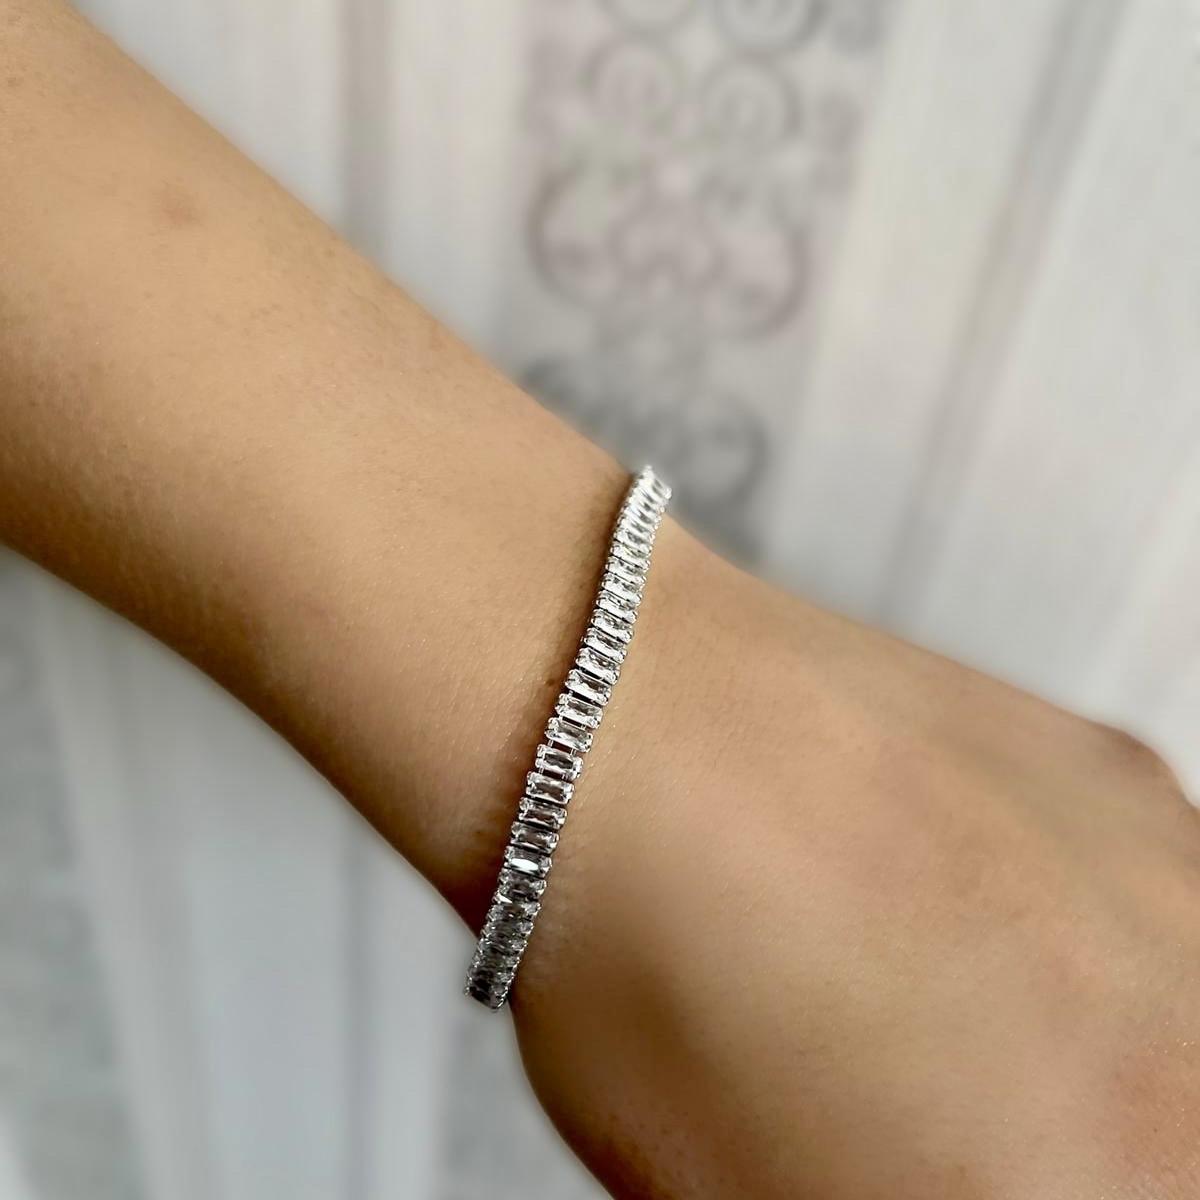 Daiamond Water Bracelet • Bridesmaid Gifts For Wedding Day - Trending Silver Gifts